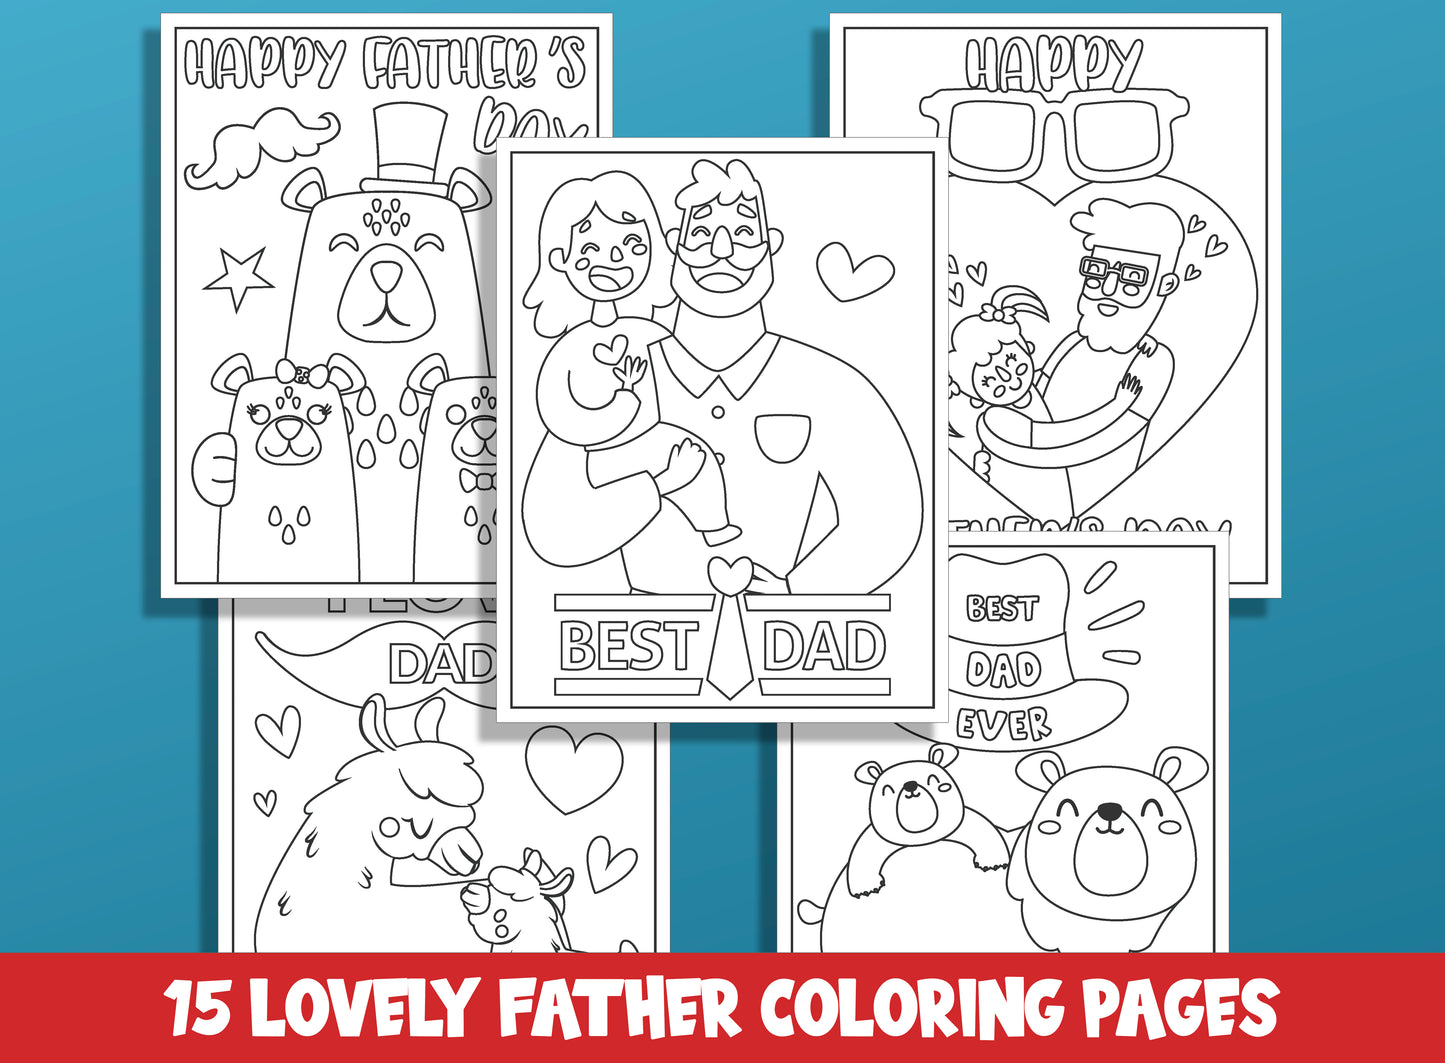 Lovely Father's Day Coloring Pages: 15 Sheets for Kids, Boys, Girls, and Teens - Ideal Gift for Daddy or Grandpa - PDF Instant Download